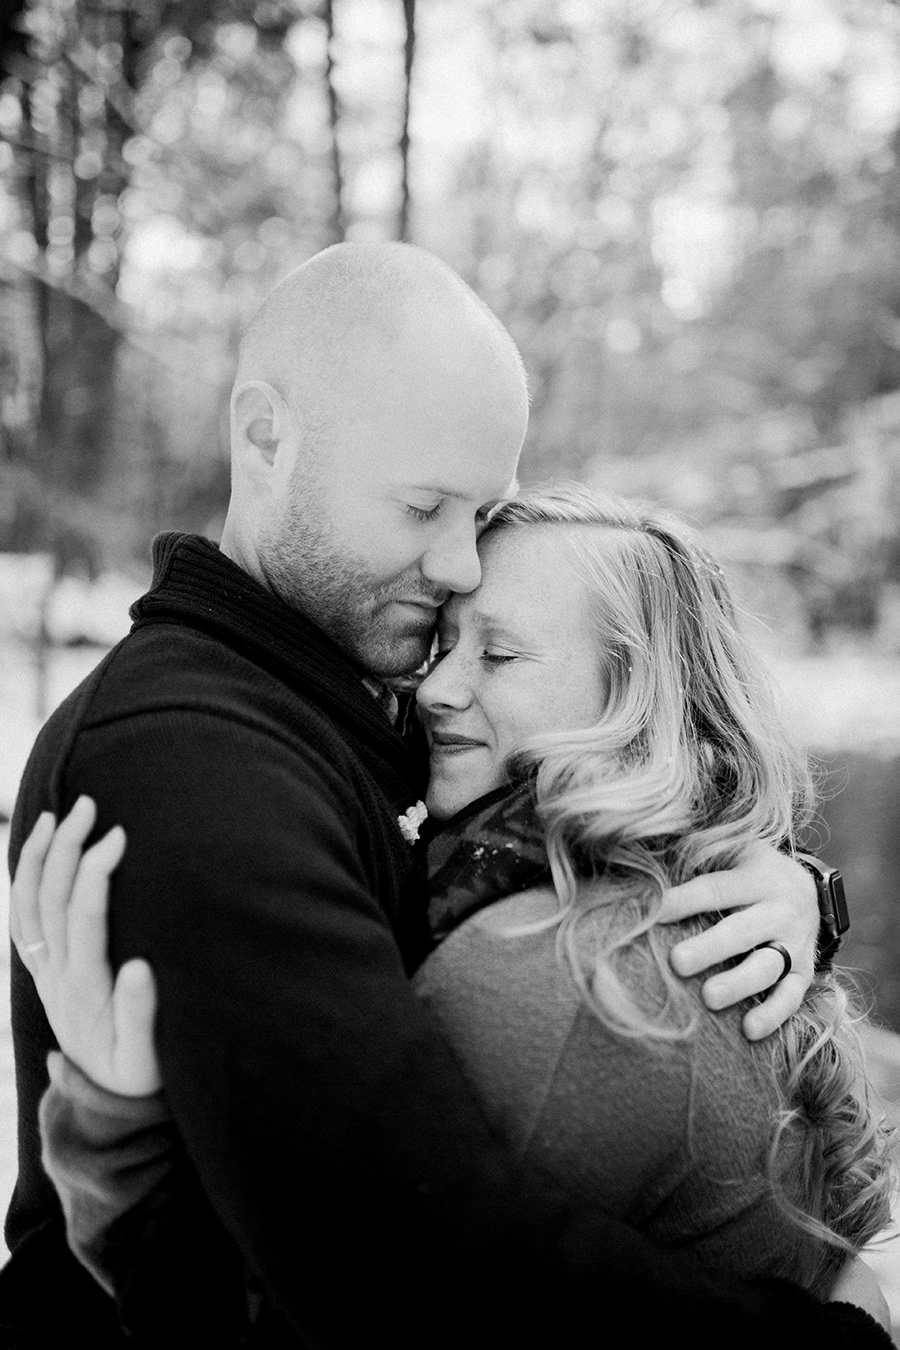  Knoxville, TN Smoky Mountain maternity photos, hugging her in black and white.